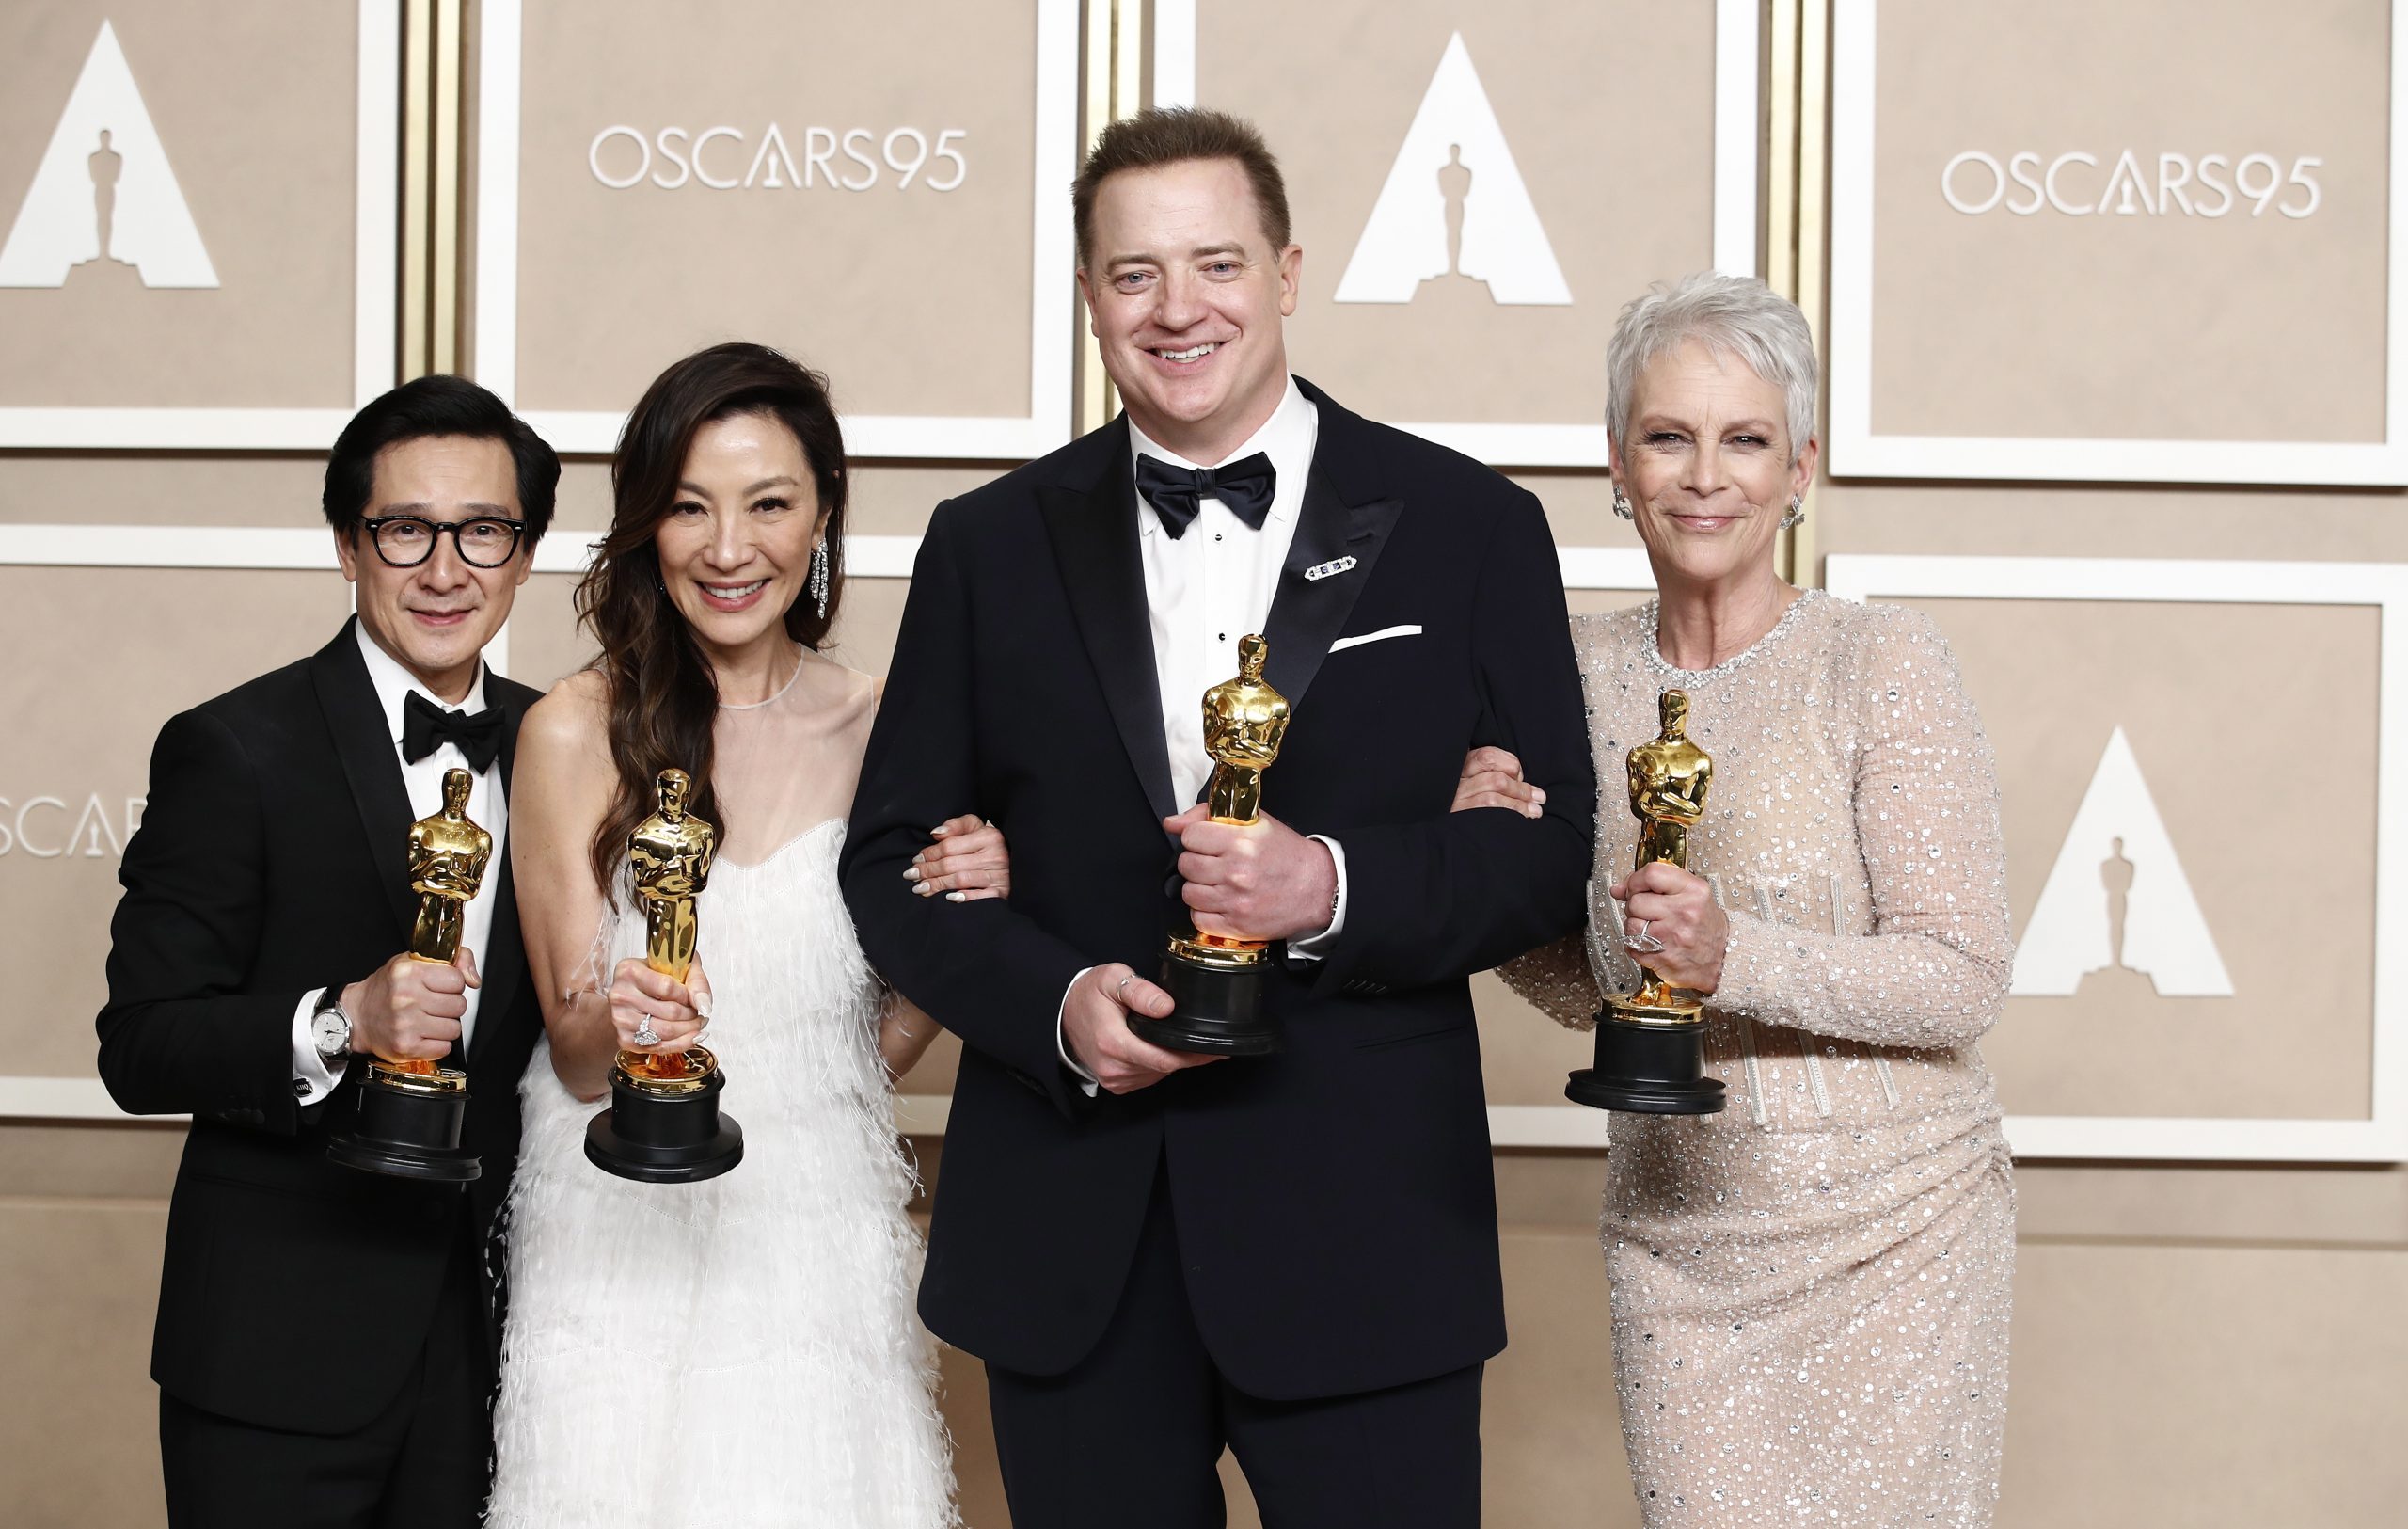 epa10519383 (L-R) Ke Huy Quan with his Oscar for Best Supporting Actor, Michelle Yeoh with her Oscar for Best Actress, Brendan Fraser with his Oscar for Best Actor and Jamie Lee Curtis with her Oscar for Best Supporting Actress pose in the press room during the 95th annual Academy Awards ceremony at the Dolby Theatre in Hollywood, Los Angeles, California, USA, 12 March 2023. The Oscars are presented for outstanding individual or collective efforts in filmmaking in 24 categories.  EPA/CAROLINE BREHMAN